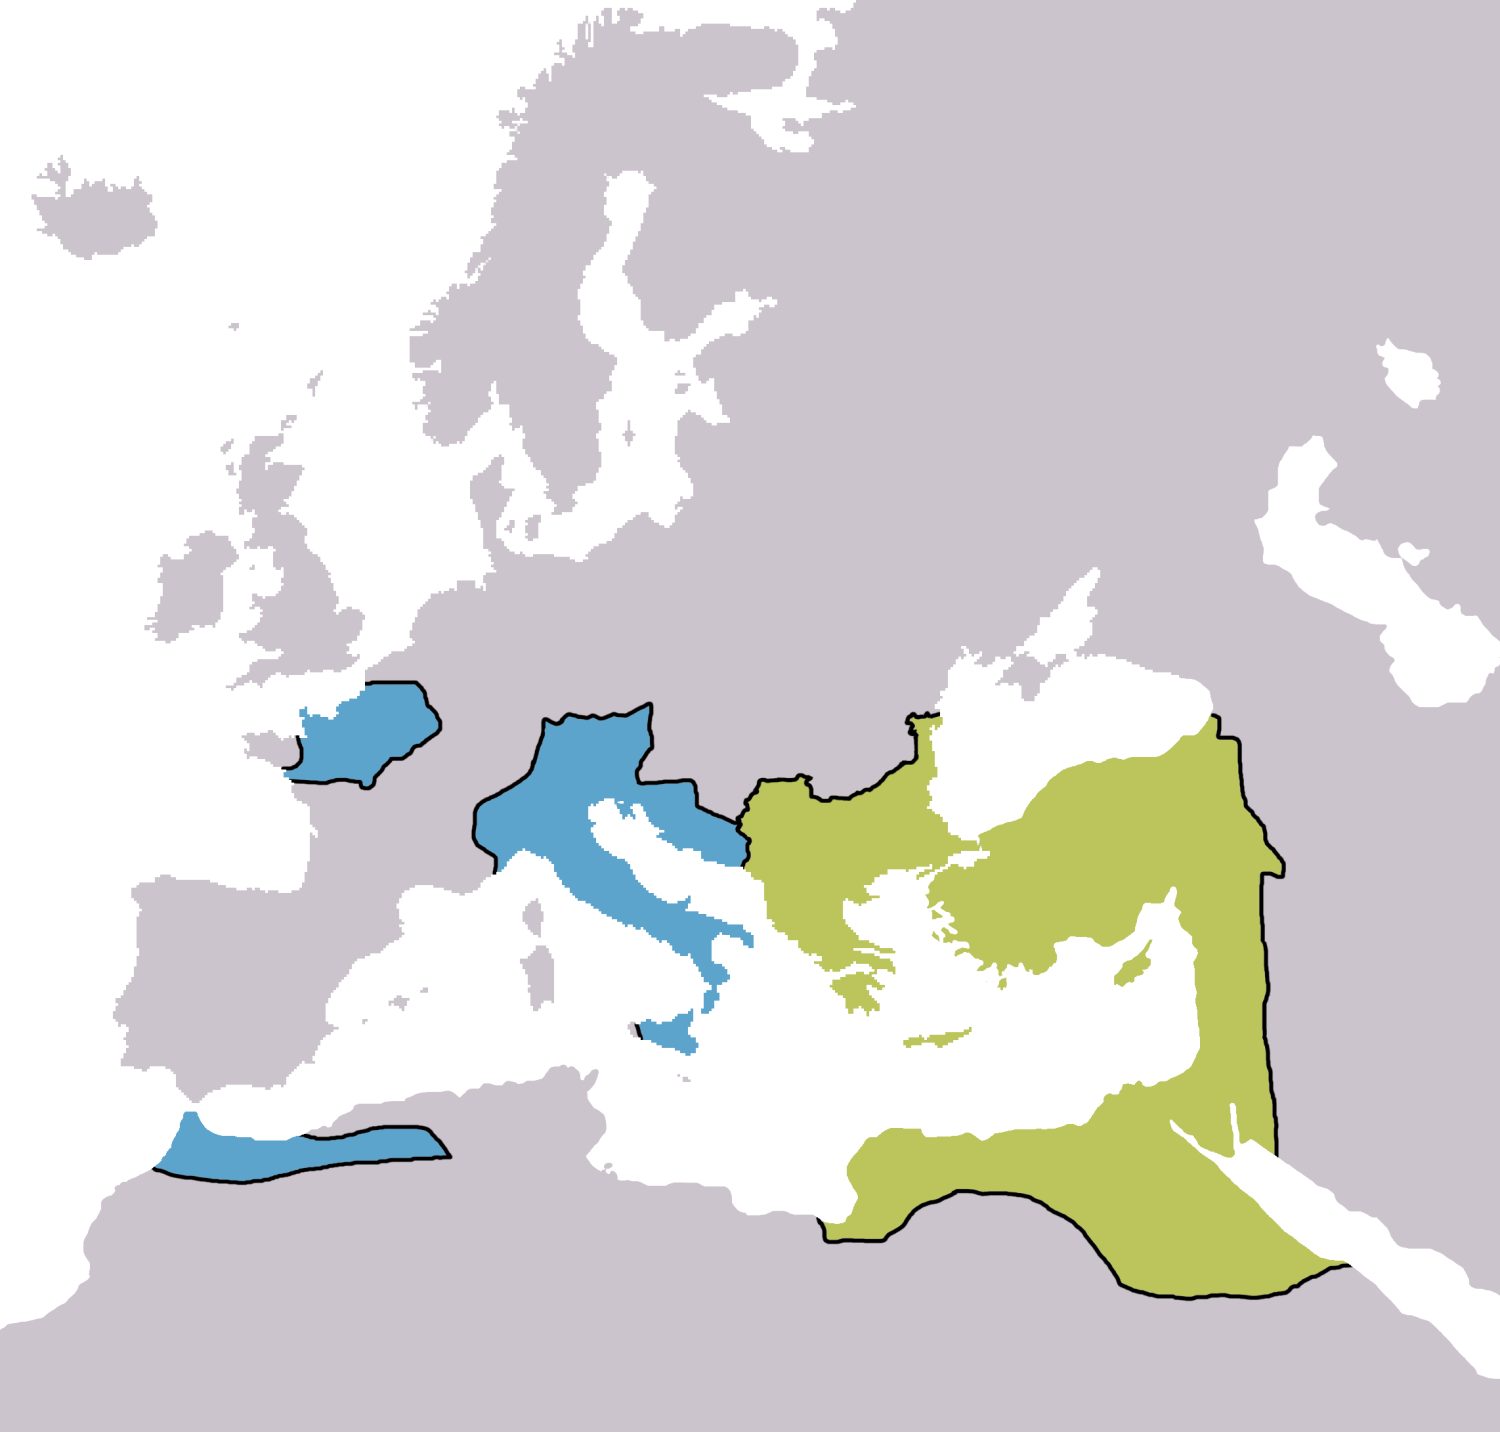 Just How Big Was The Roman Empire At Its Height?